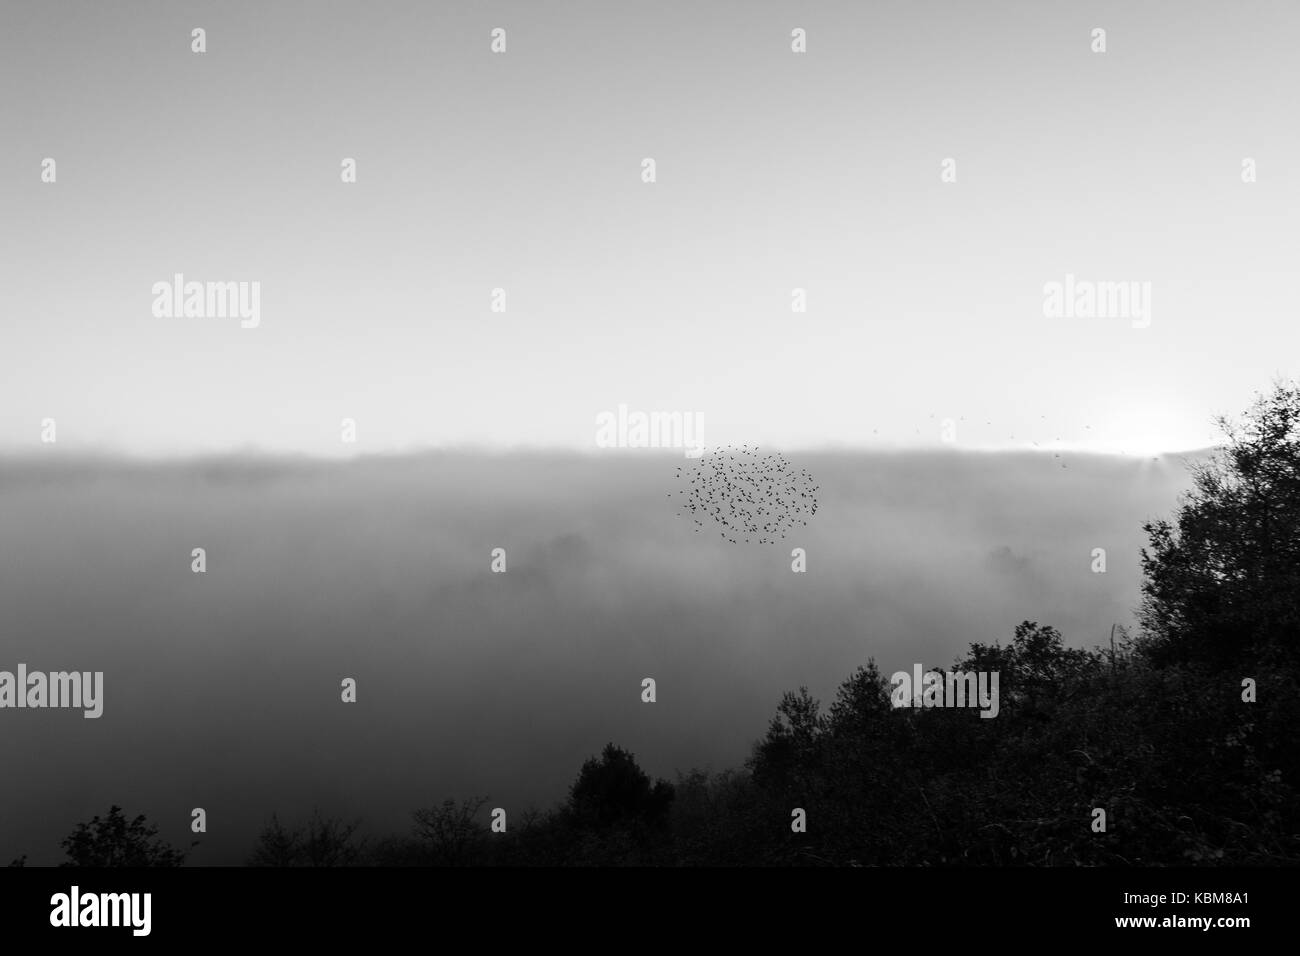 A sea of fog filling a valley at sunset, with a flock of birds flying by Stock Photo